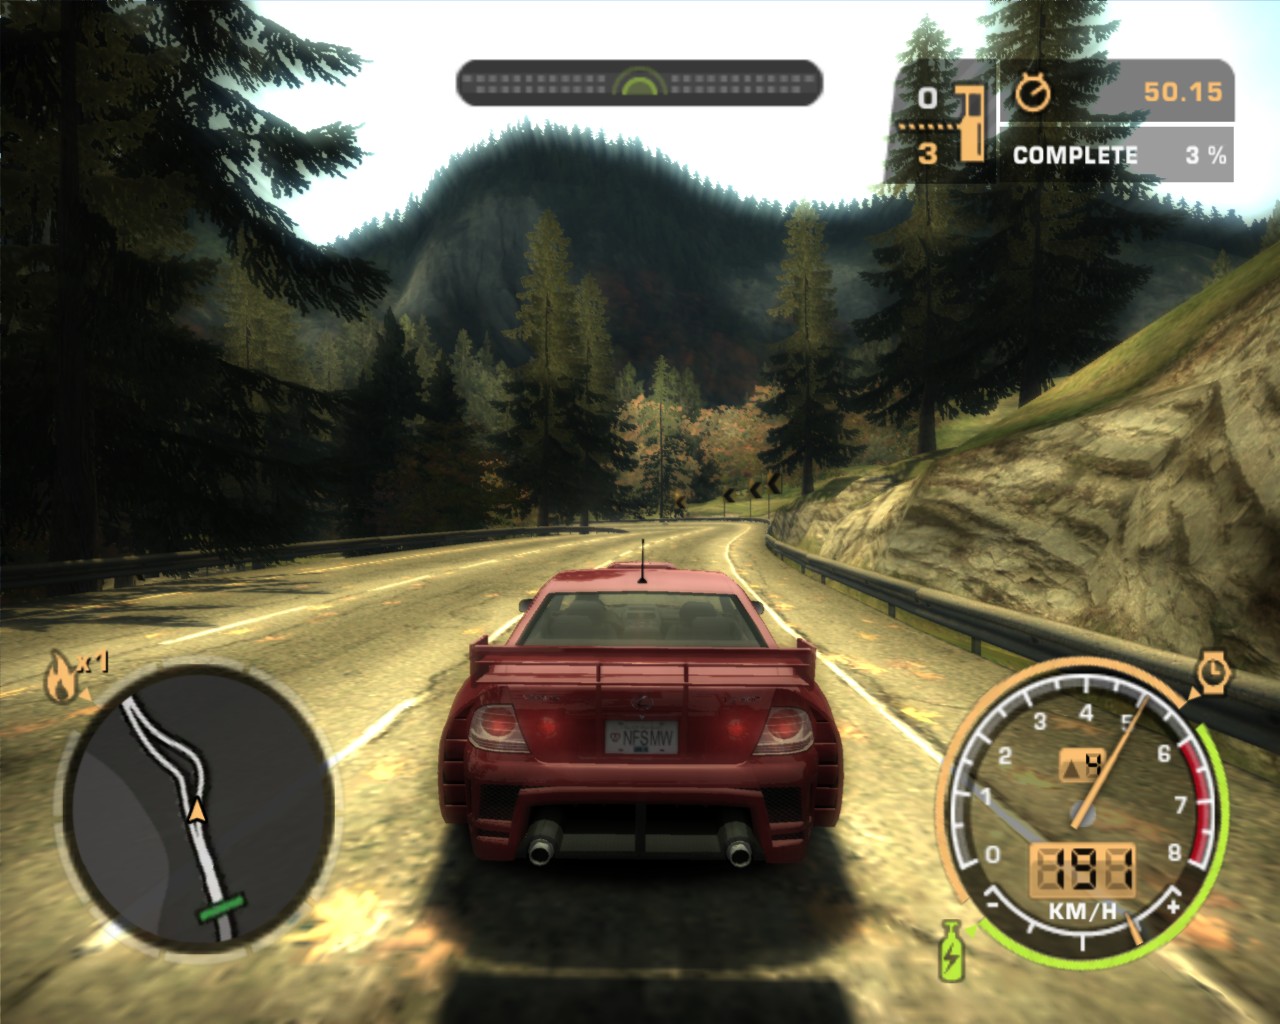 Download need for speed shift apk + data for android